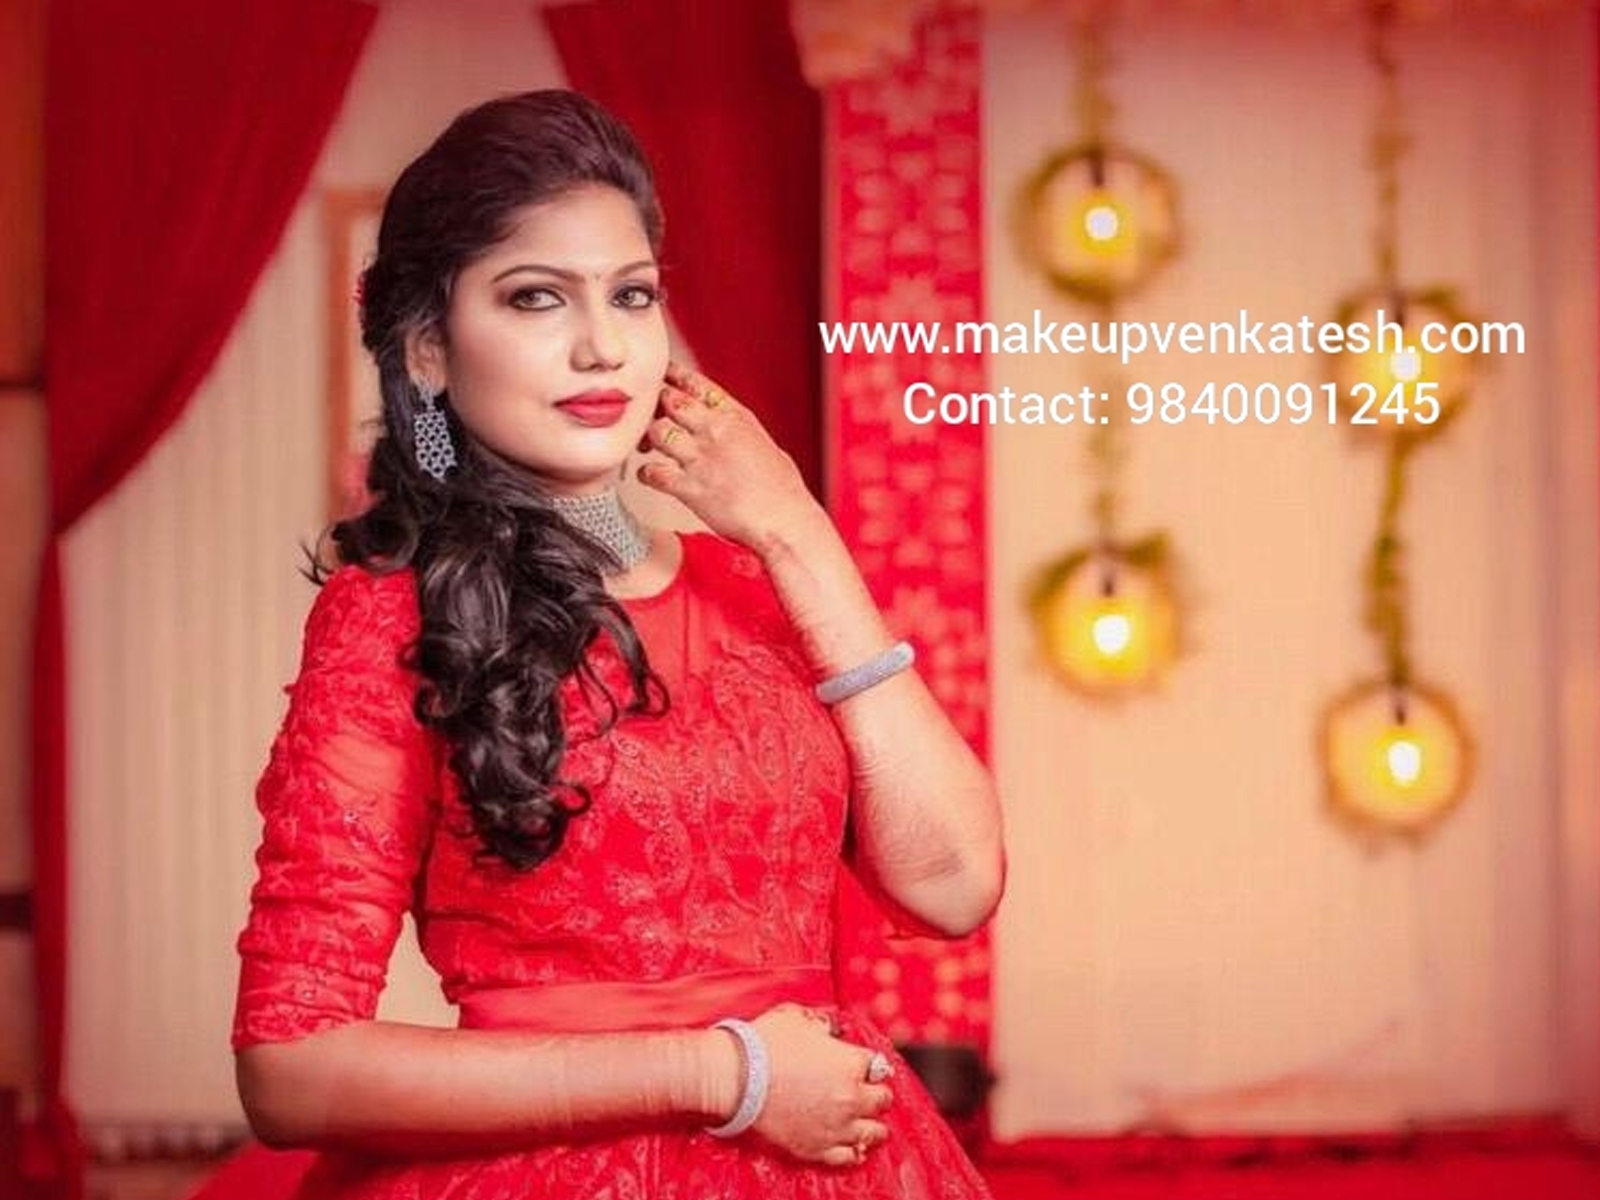 Best makeup service in chennai , professional makeup service